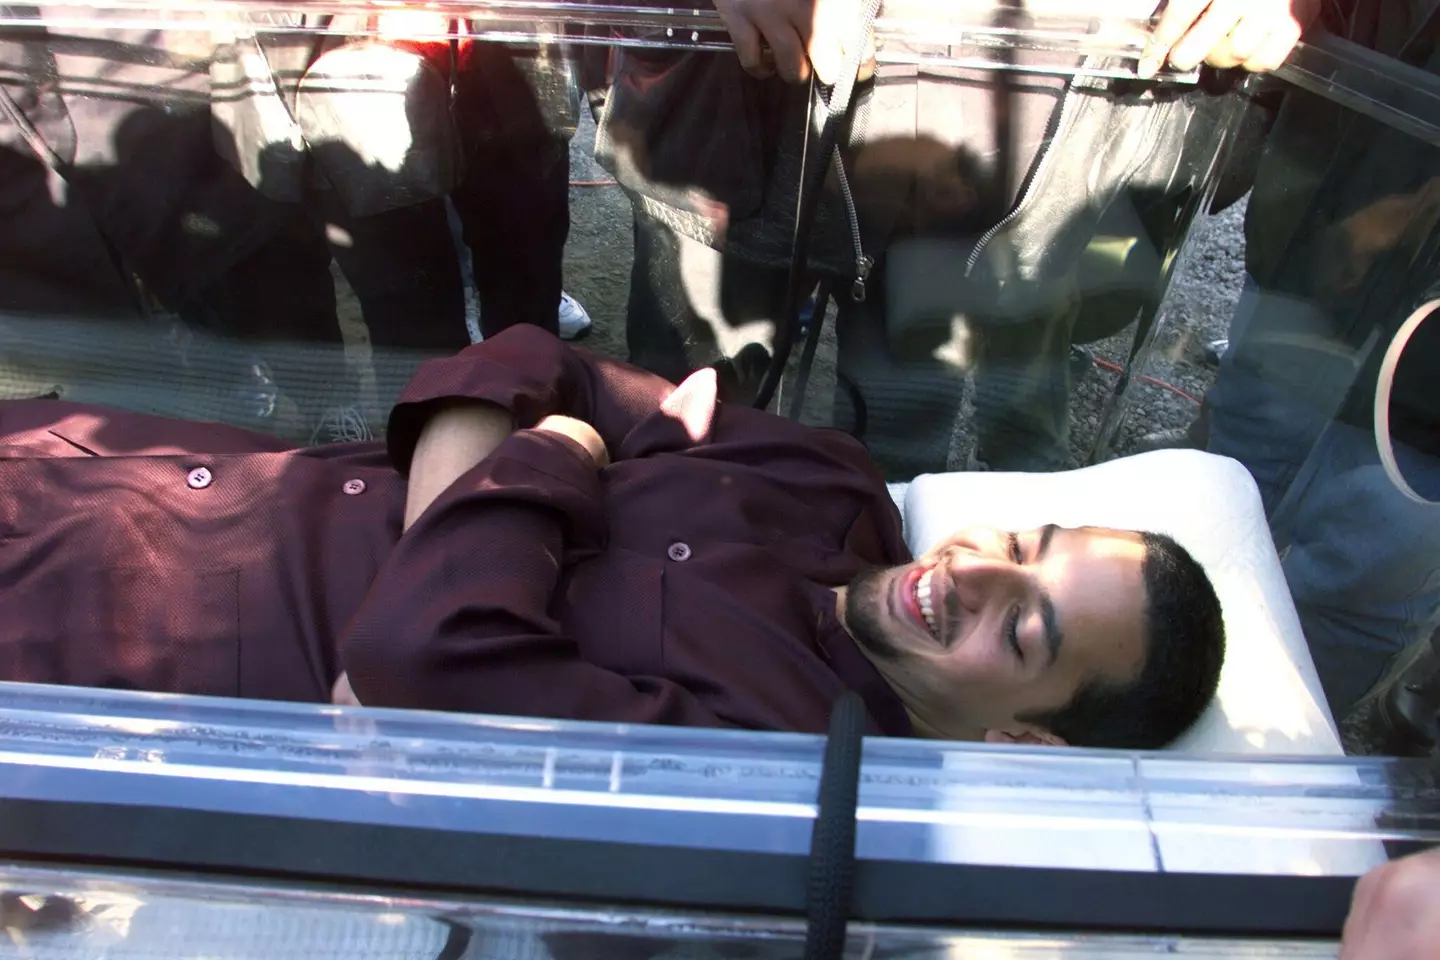 David Blaine was buried alive in a see-through coffin.